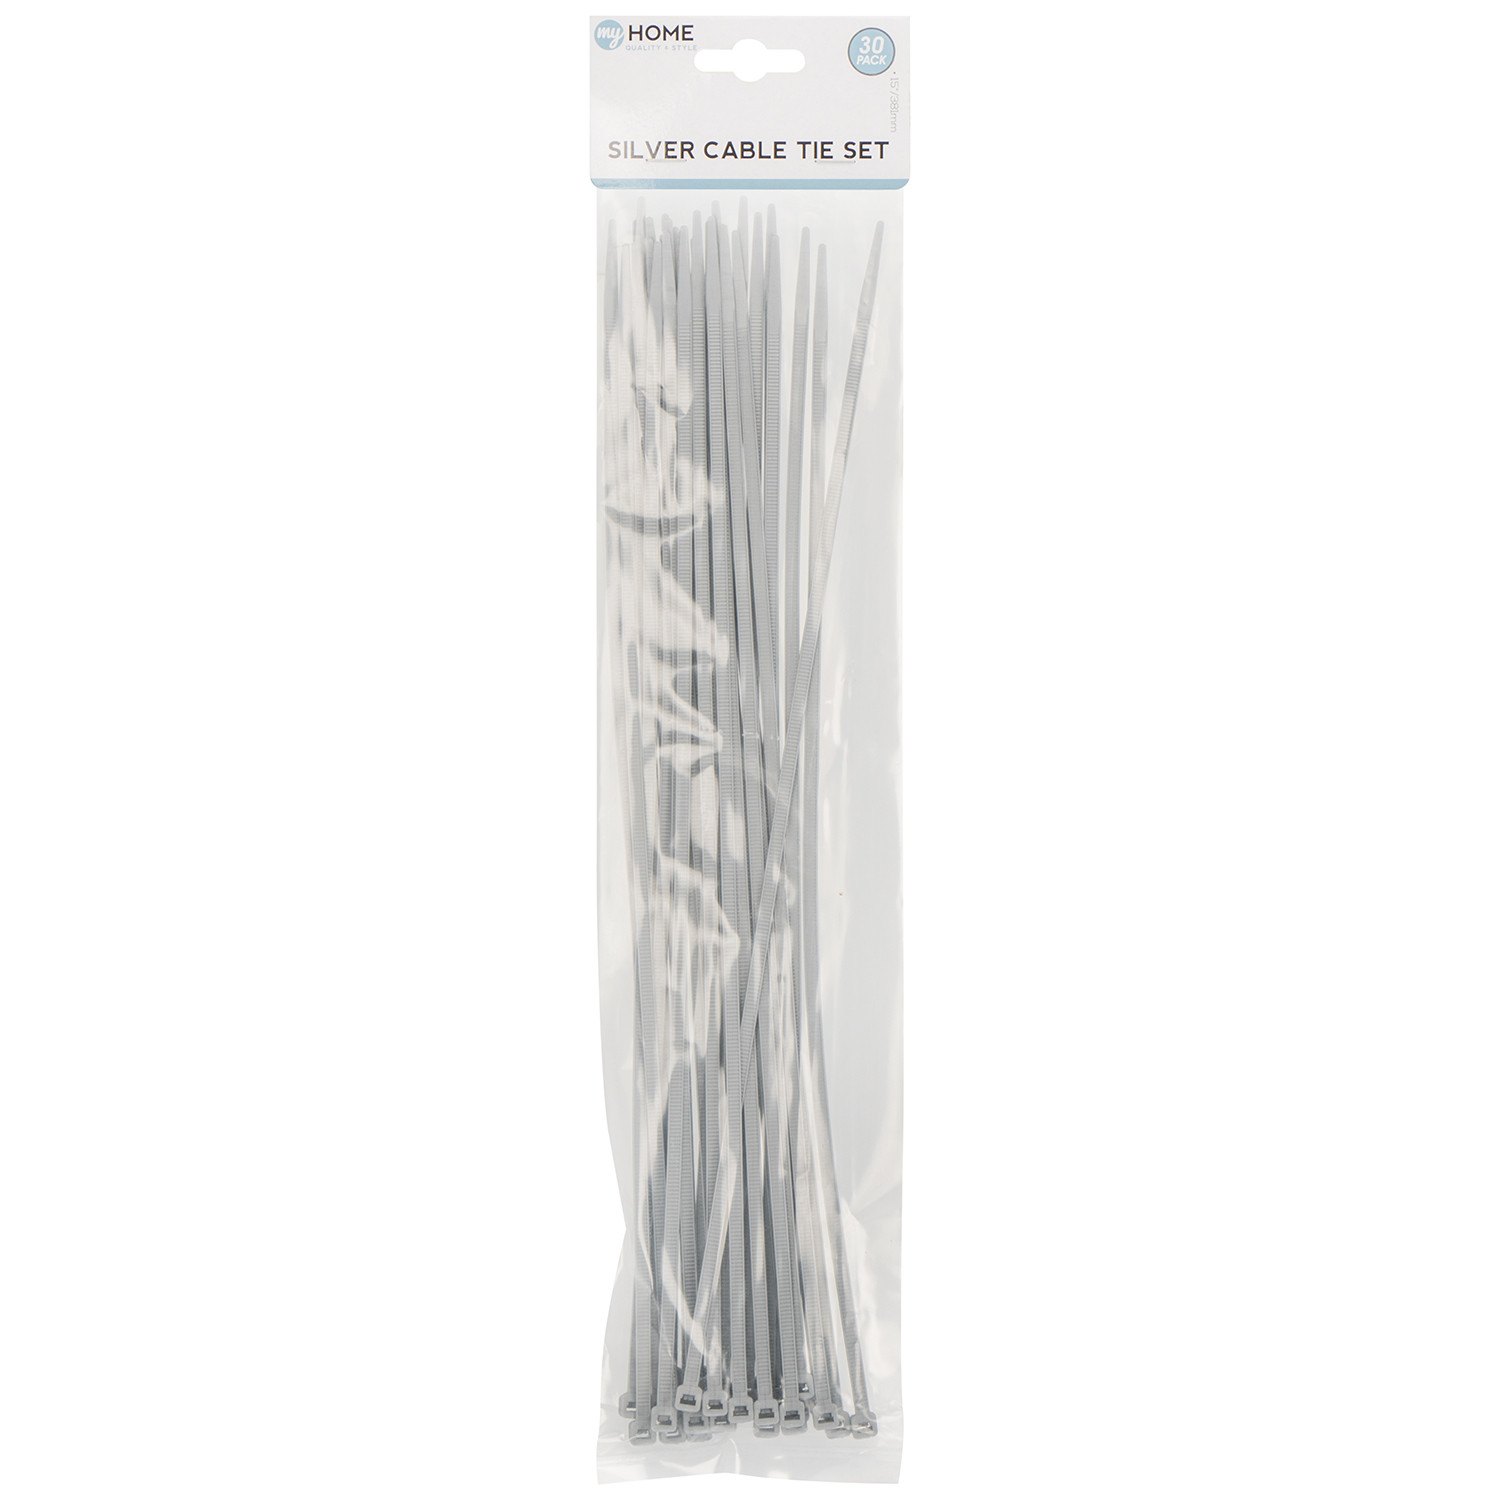 My Home Silver Cable Tie Set 30 Pack Image